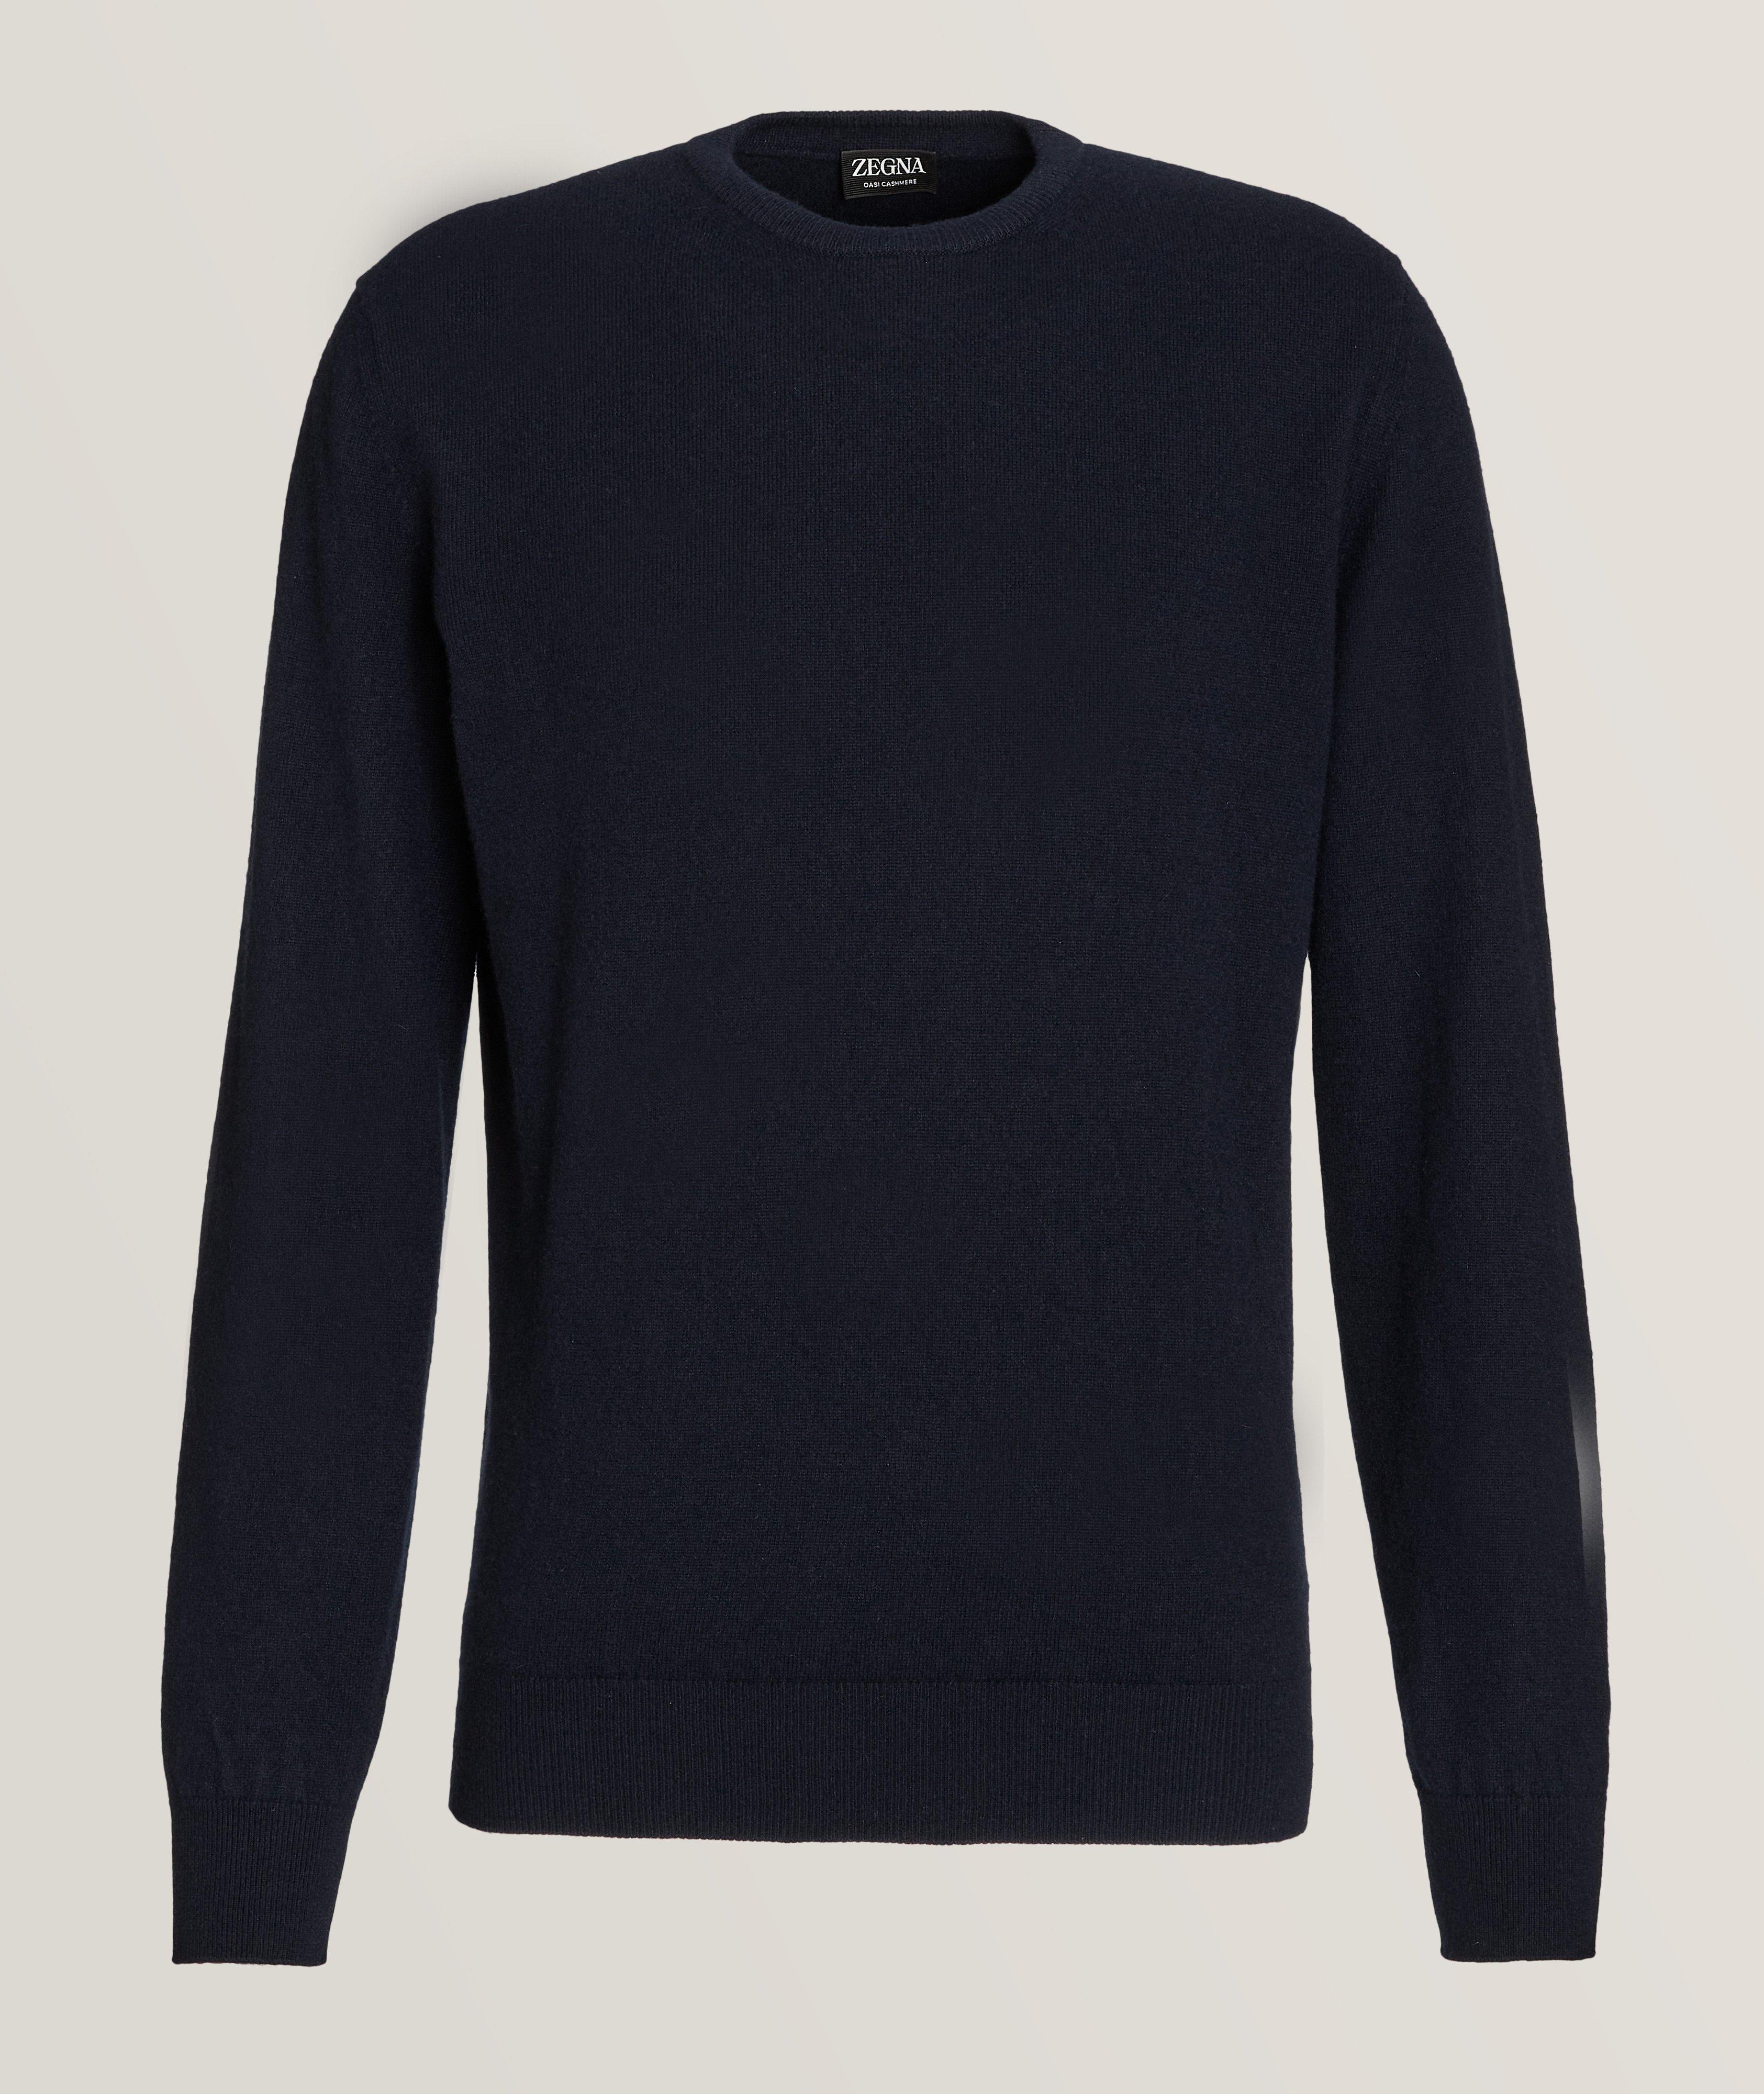 Zegna Oasi Cashmere Knitted Sweater